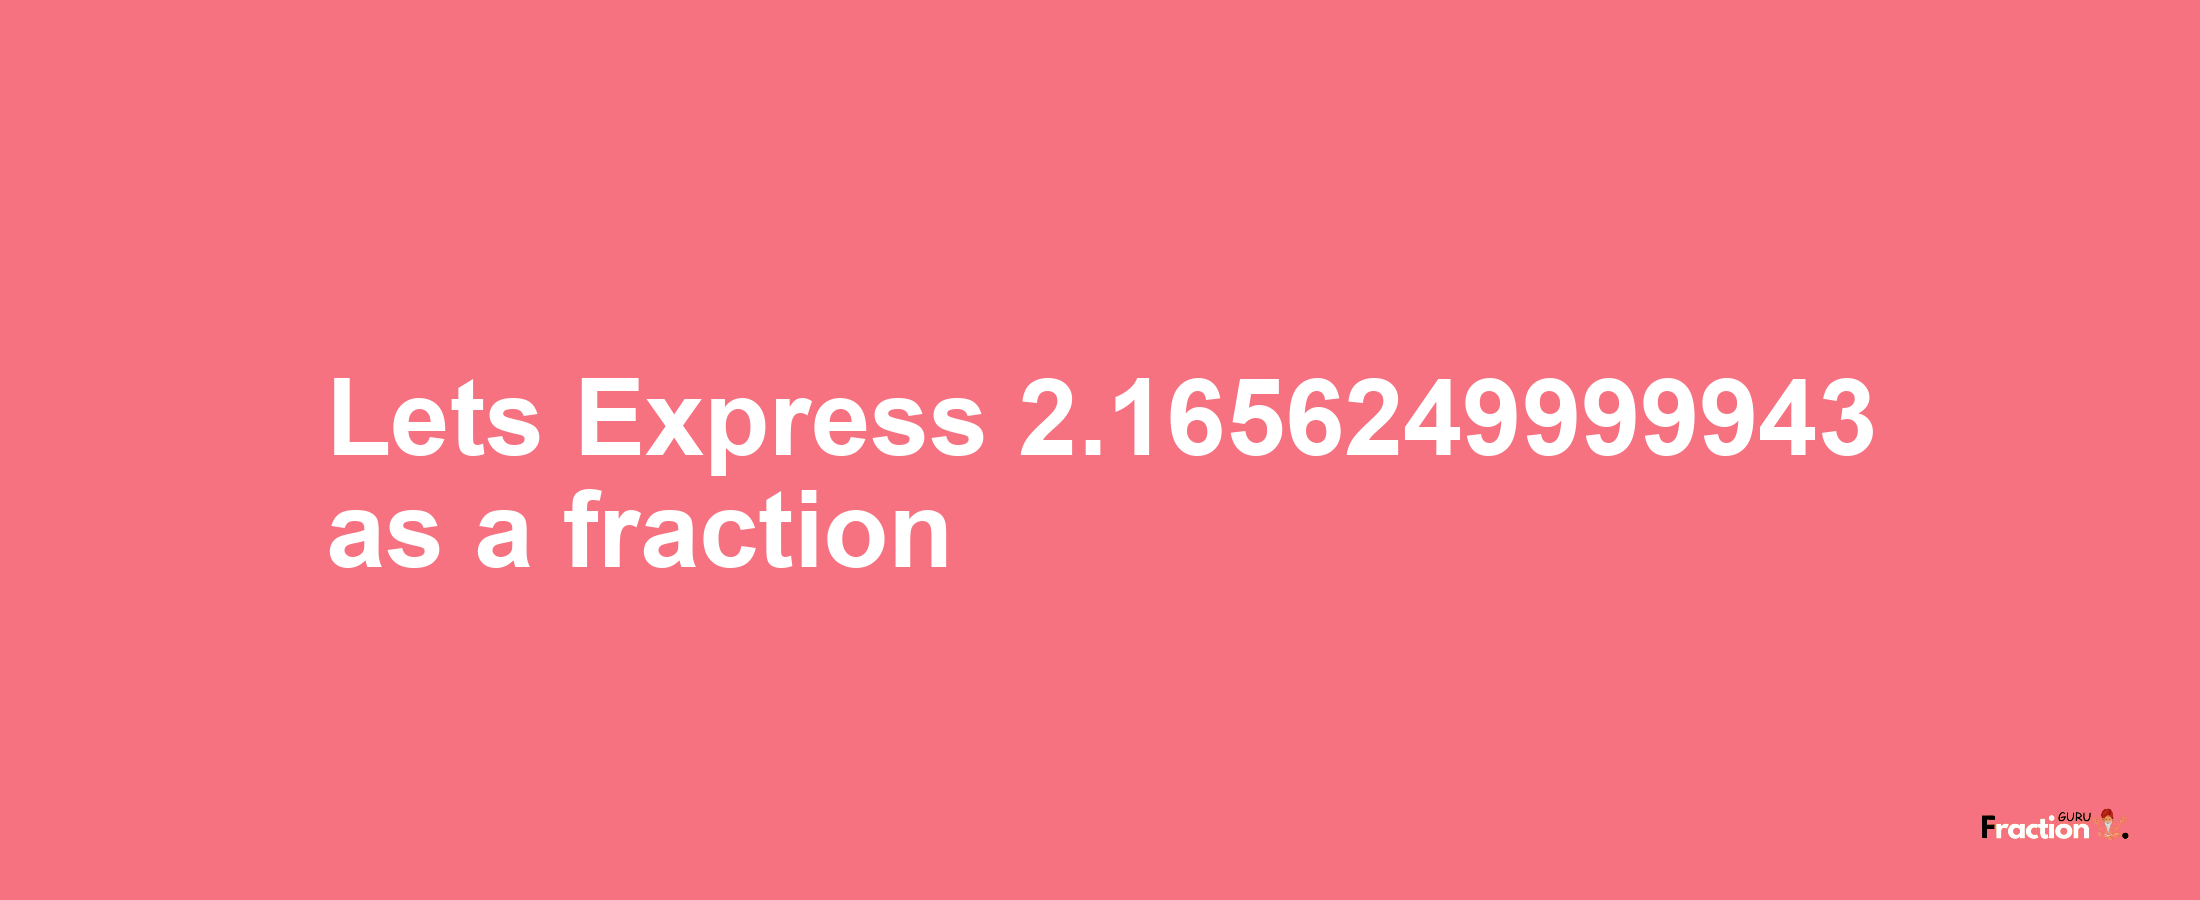 Lets Express 2.1656249999943 as afraction